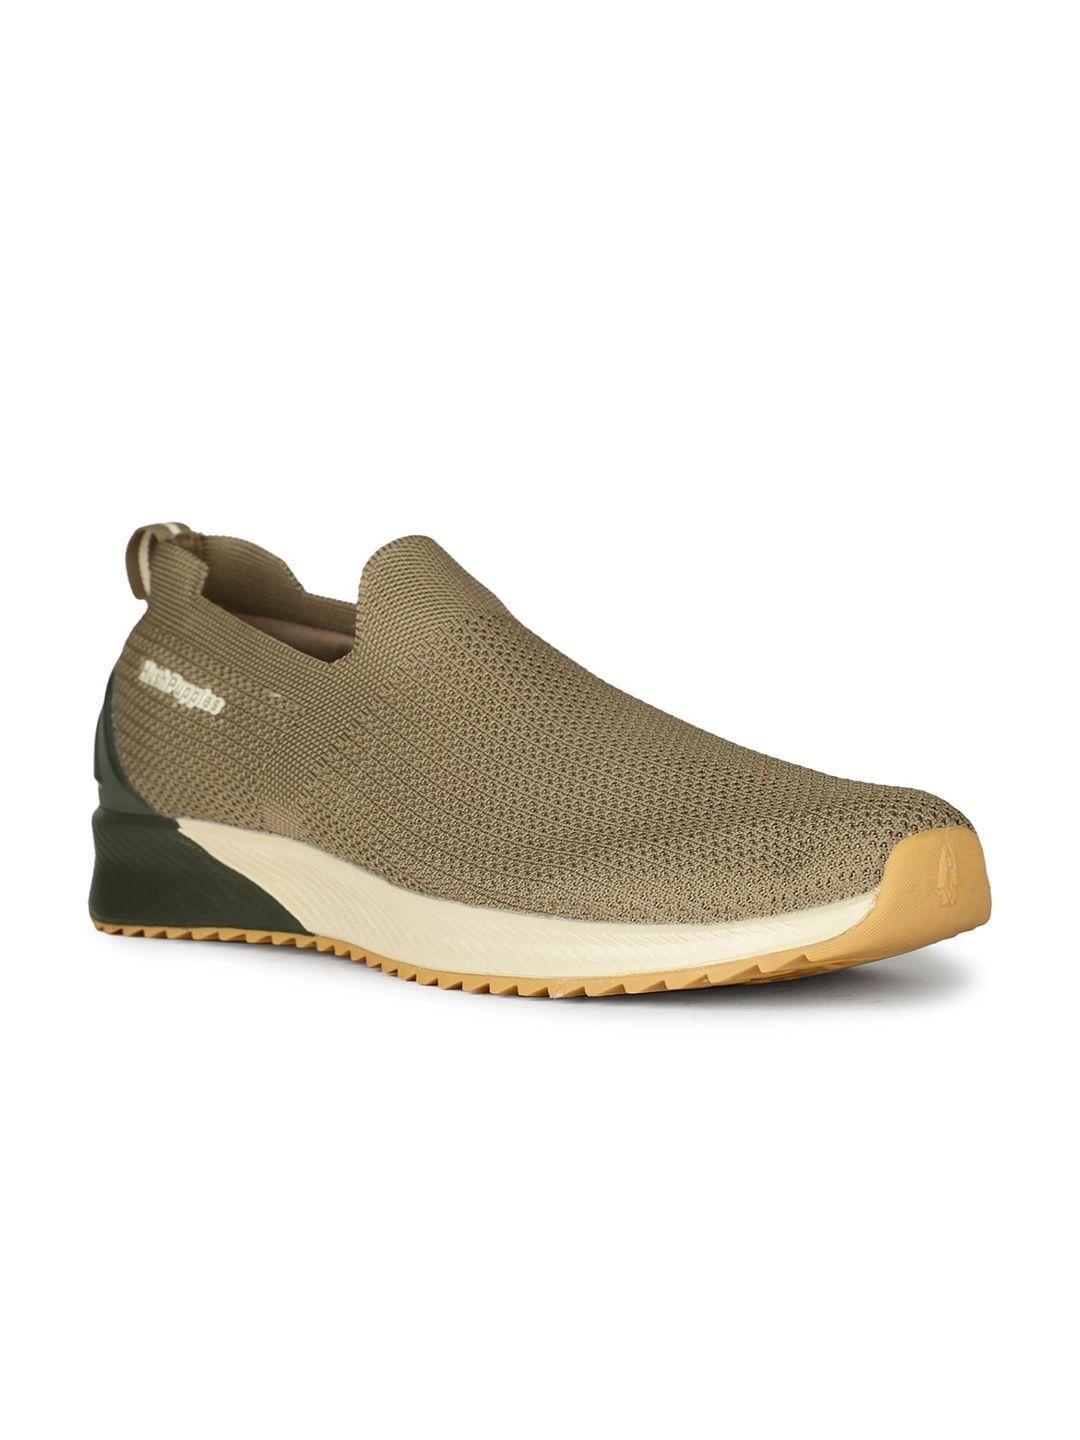 hush puppies men textured textile comfort insole contrast sole slip-on sneakers